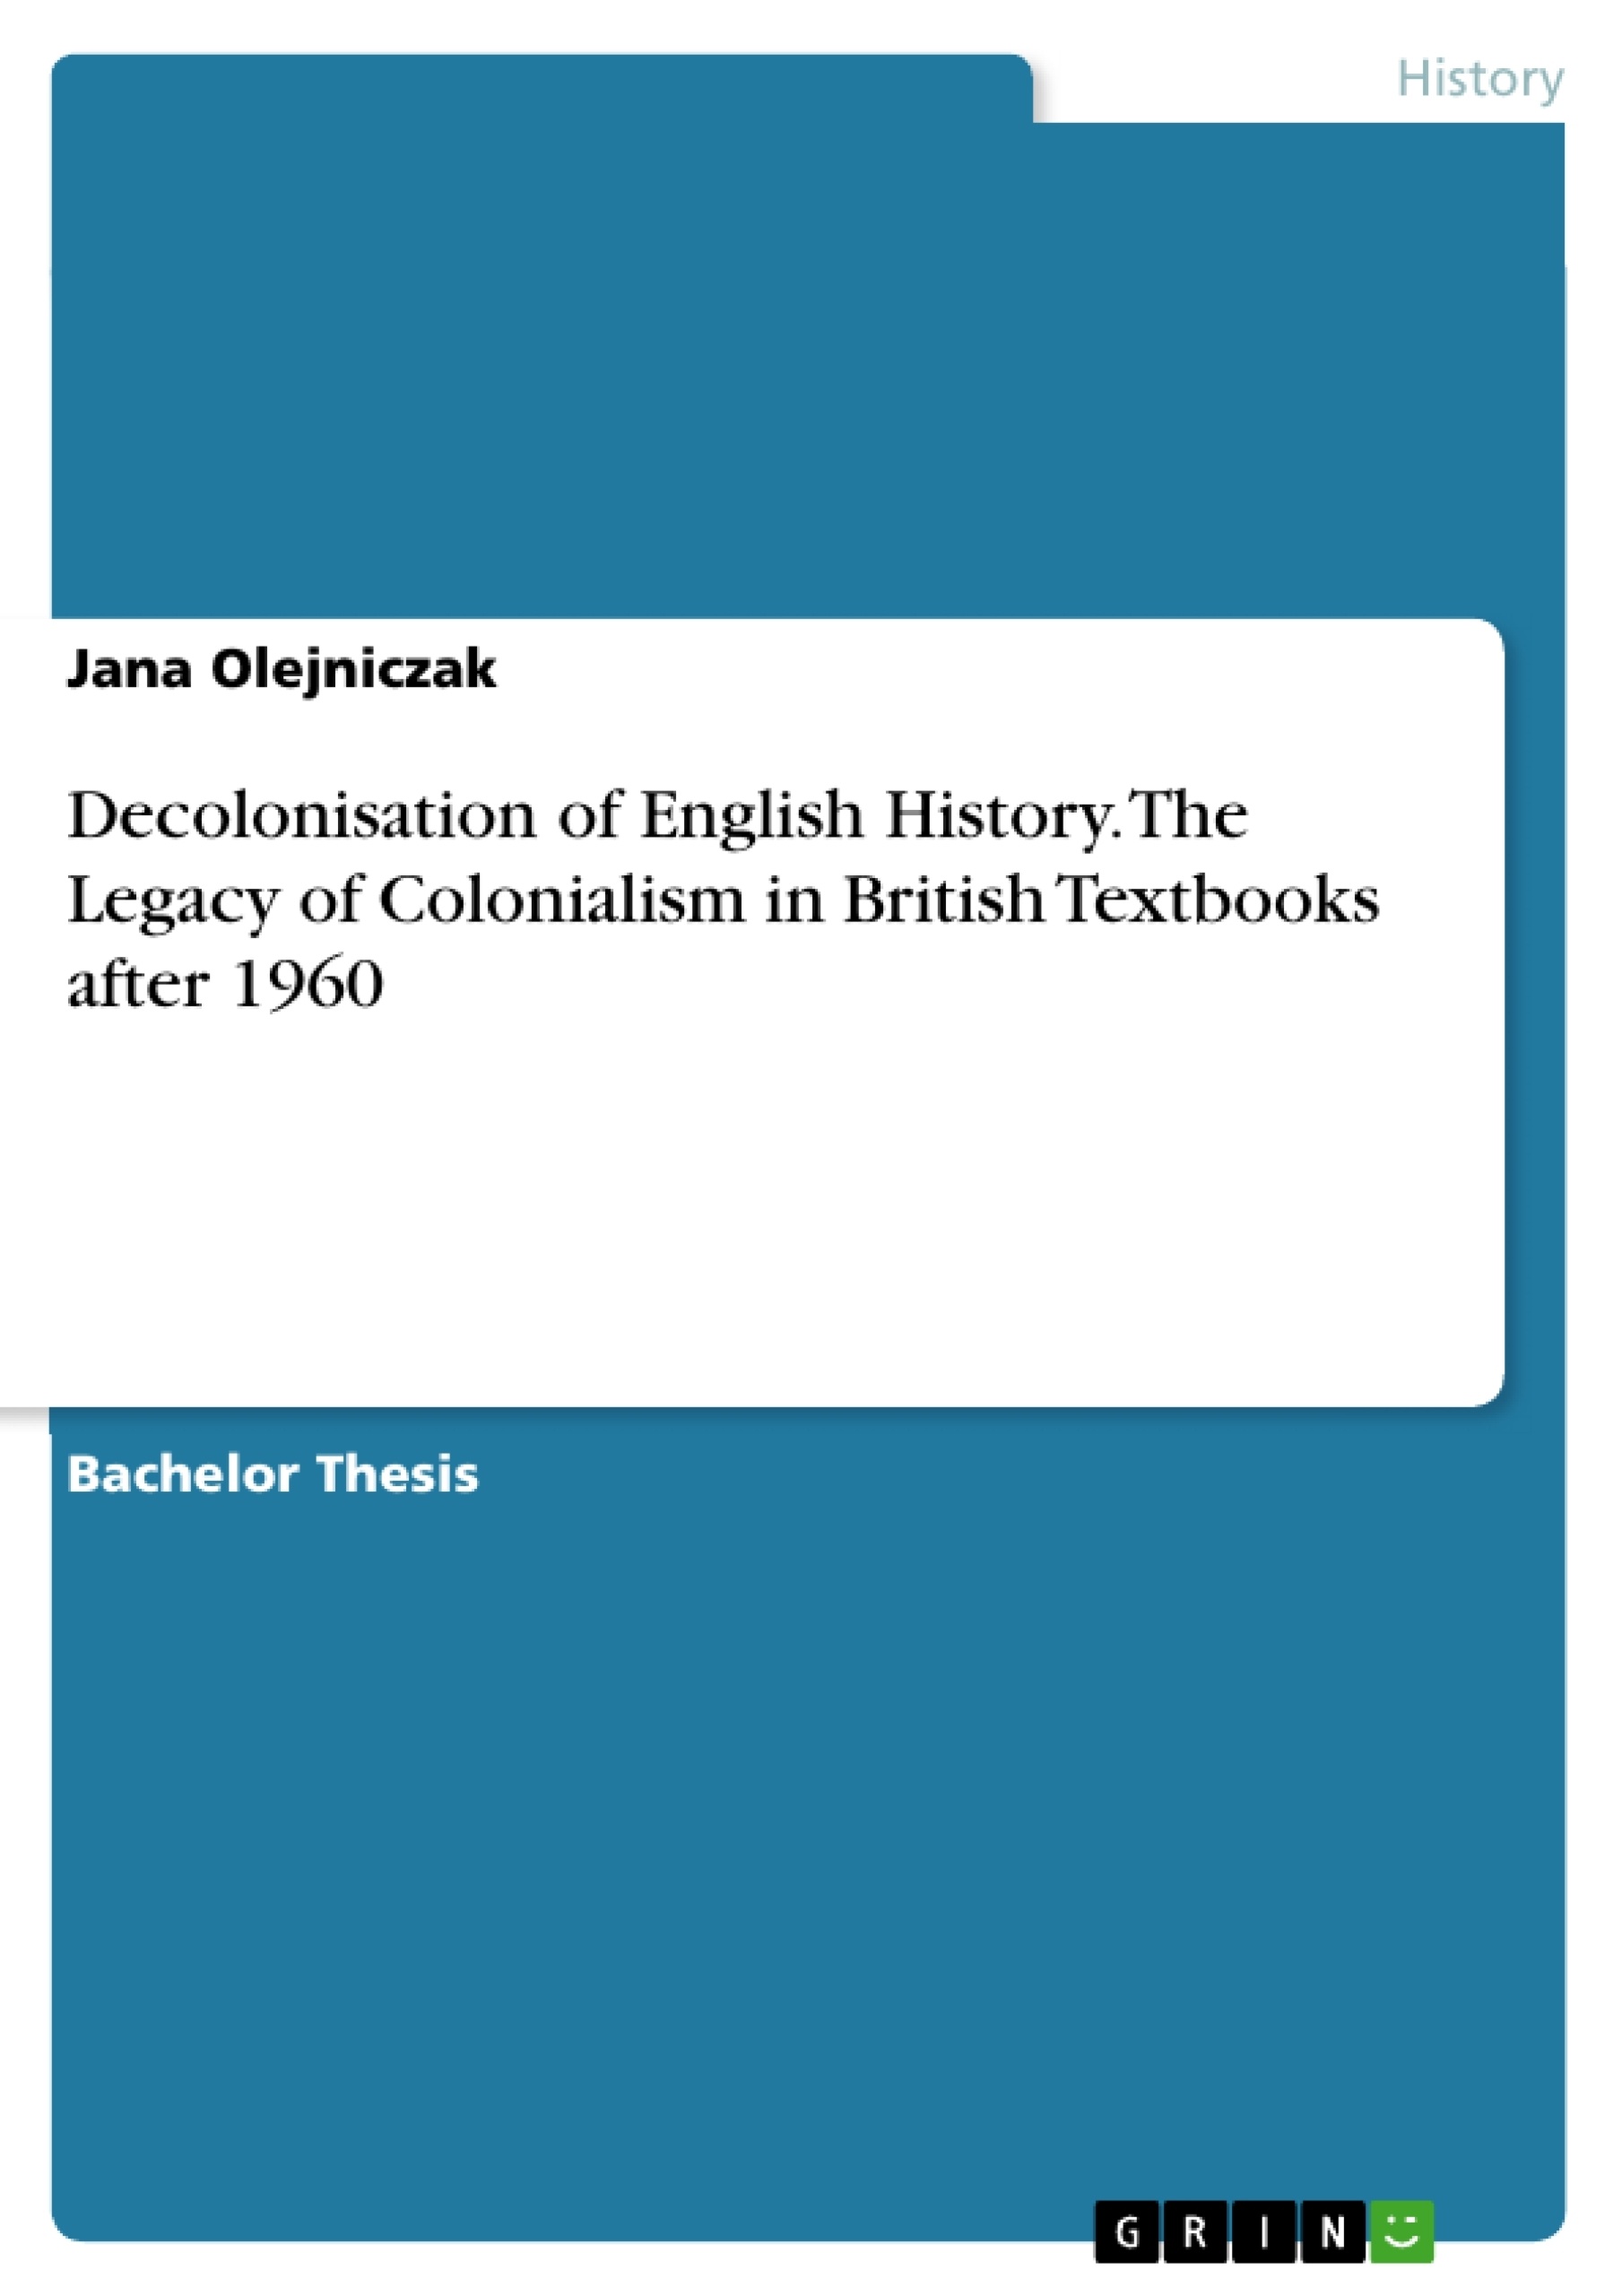 Title: Decolonisation of English History. The Legacy of Colonialism in British Textbooks after 1960